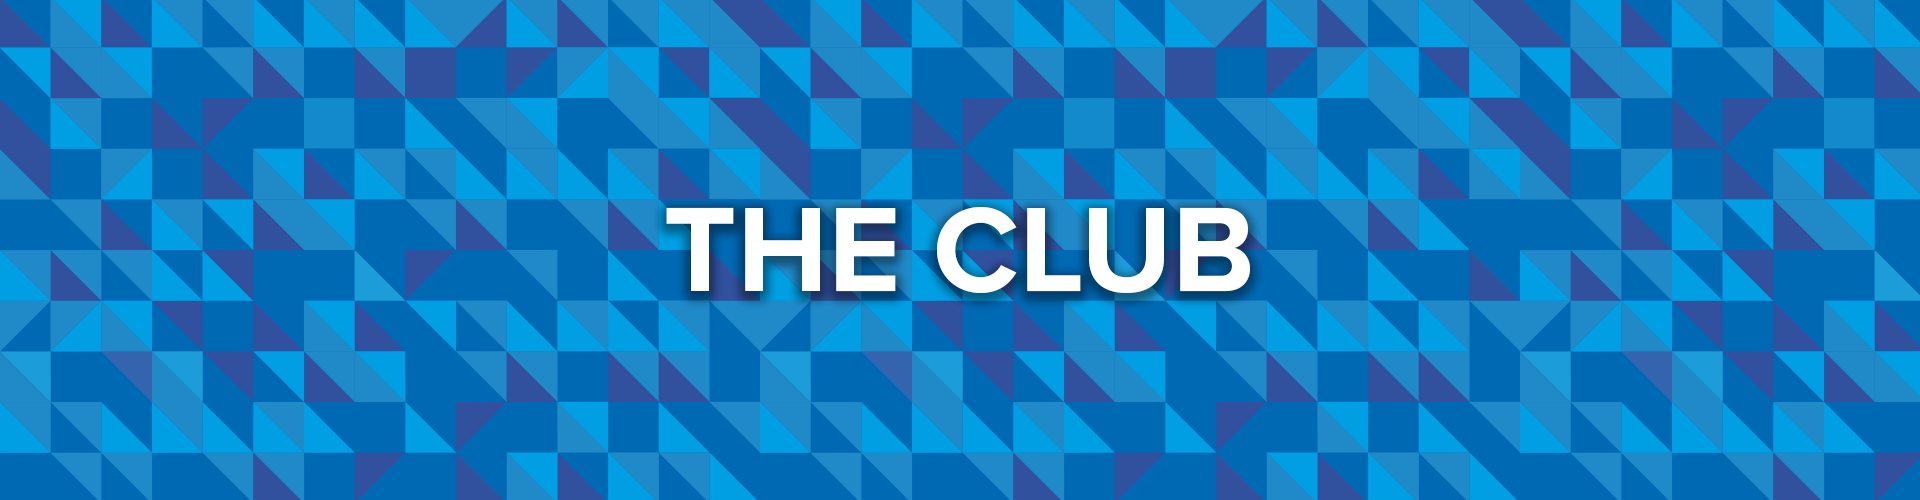 THE CLUB | Sussex Cricket